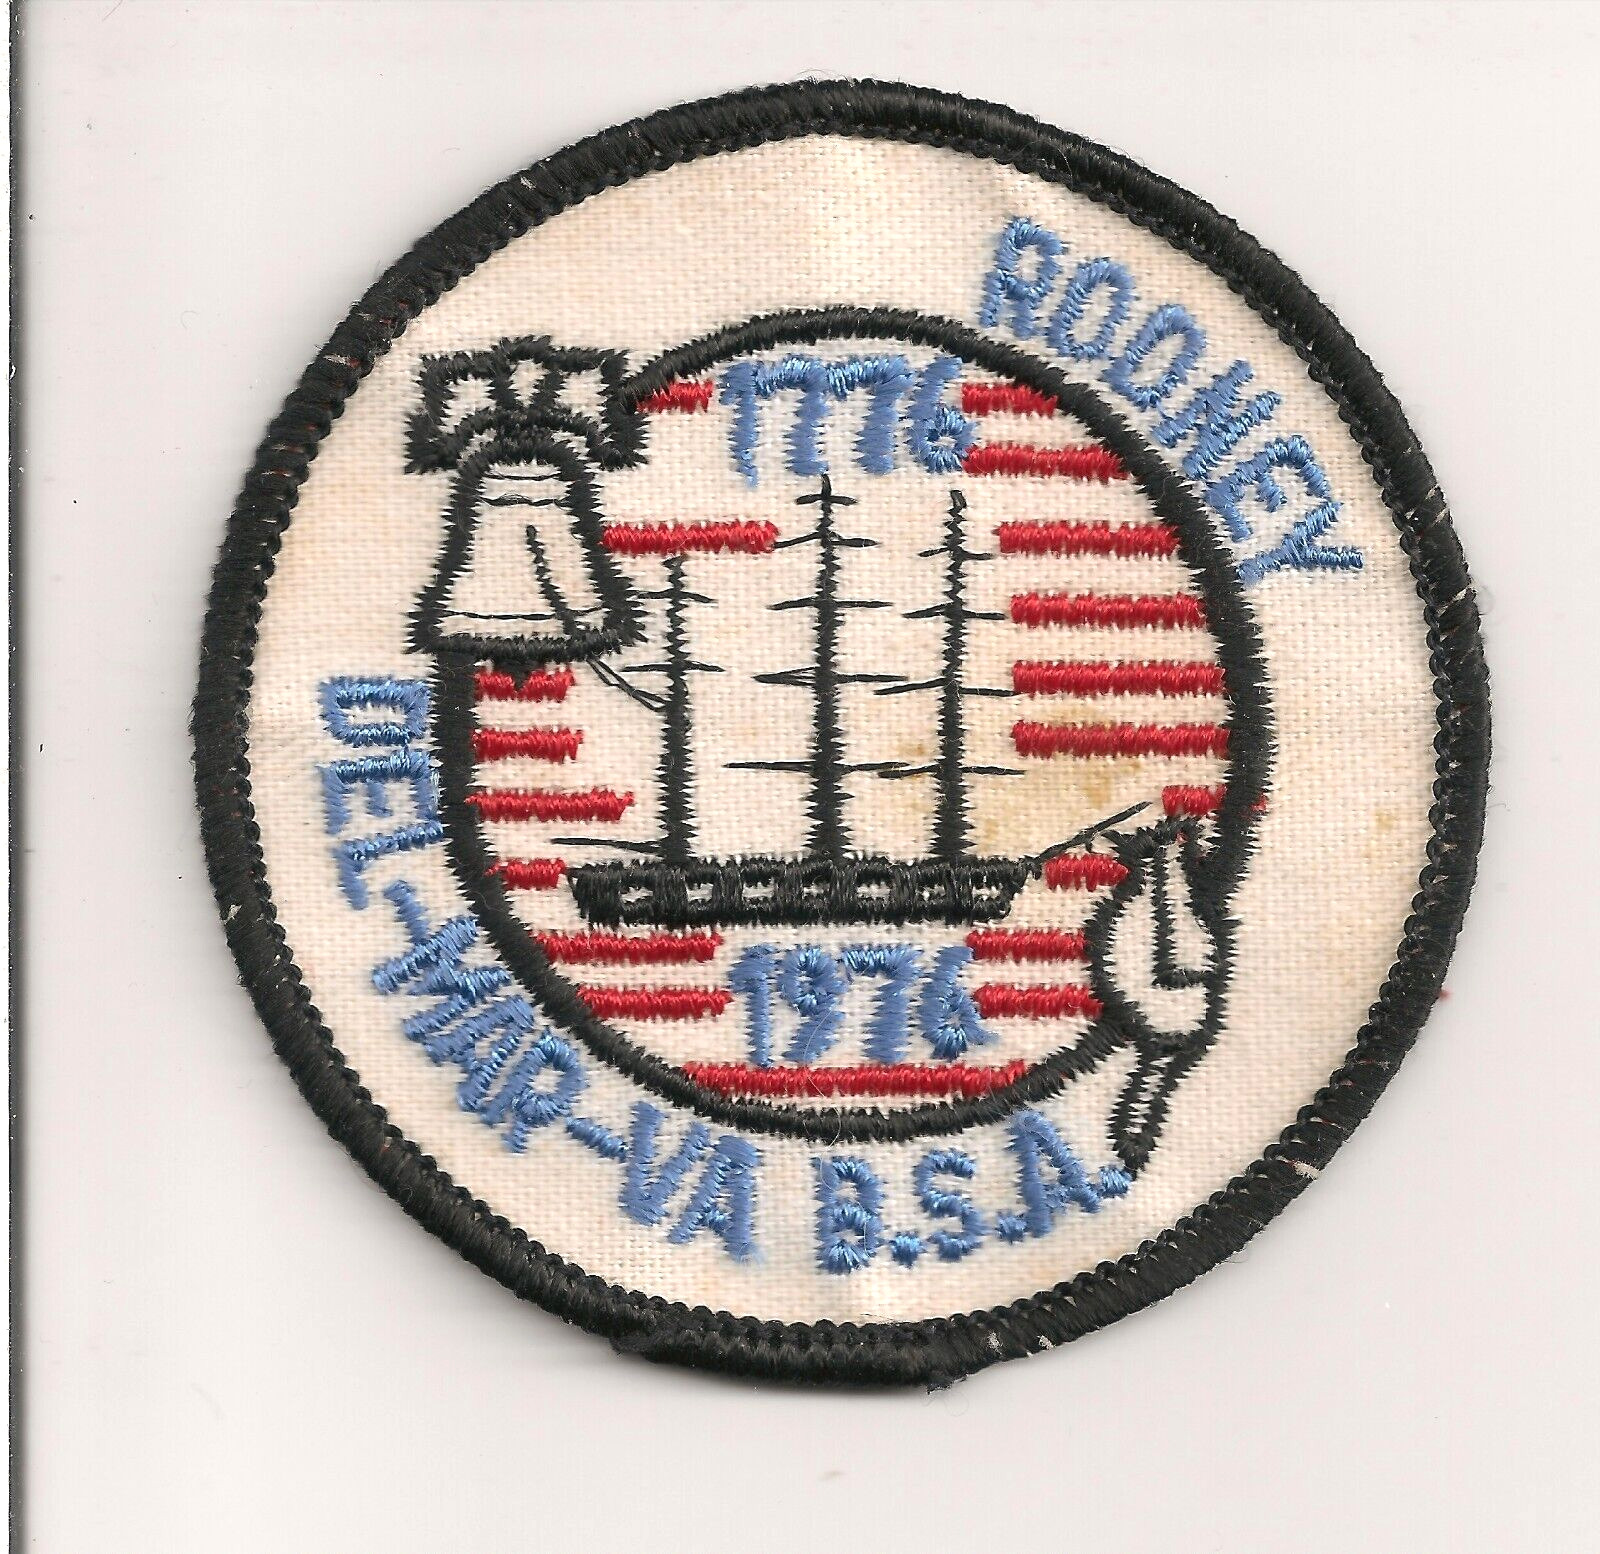 1976 RODNEY SCOUT RESERVATION  TWILL CAMP PATCH  DEL-MAR-VA CAMP BSA